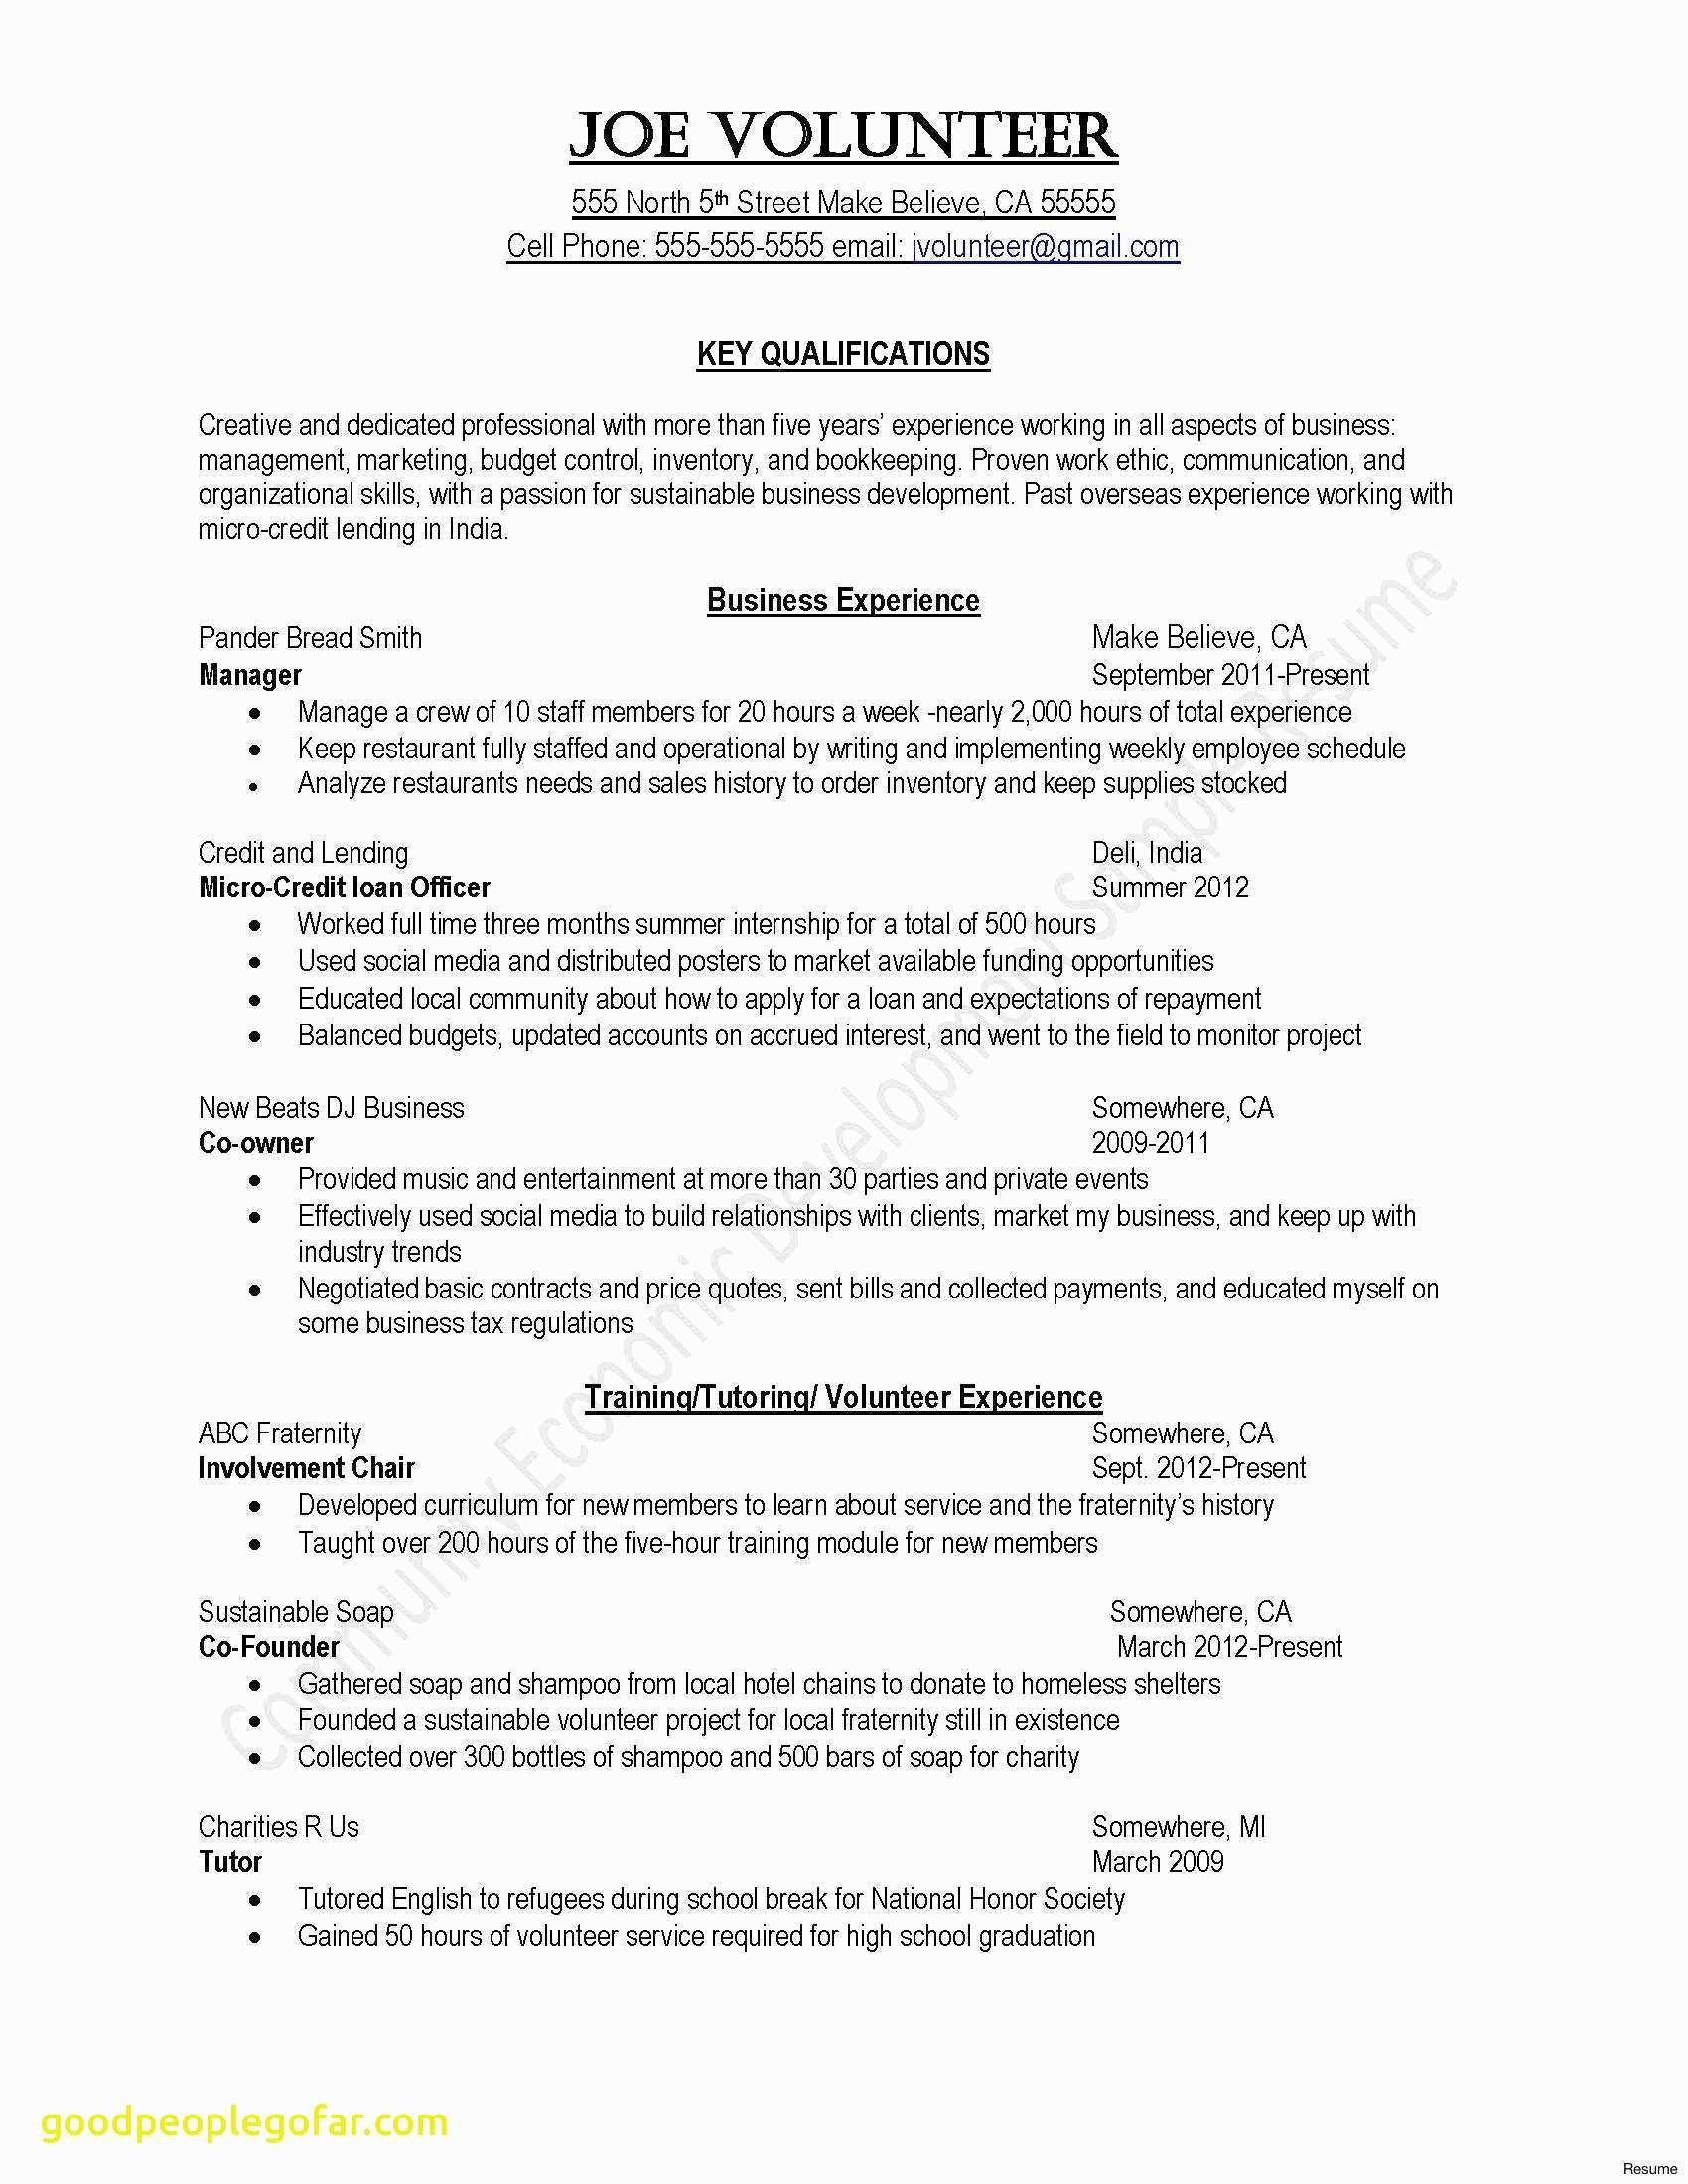 Resume Profile Examples Np Resume Samples resume profile examples|wikiresume.com